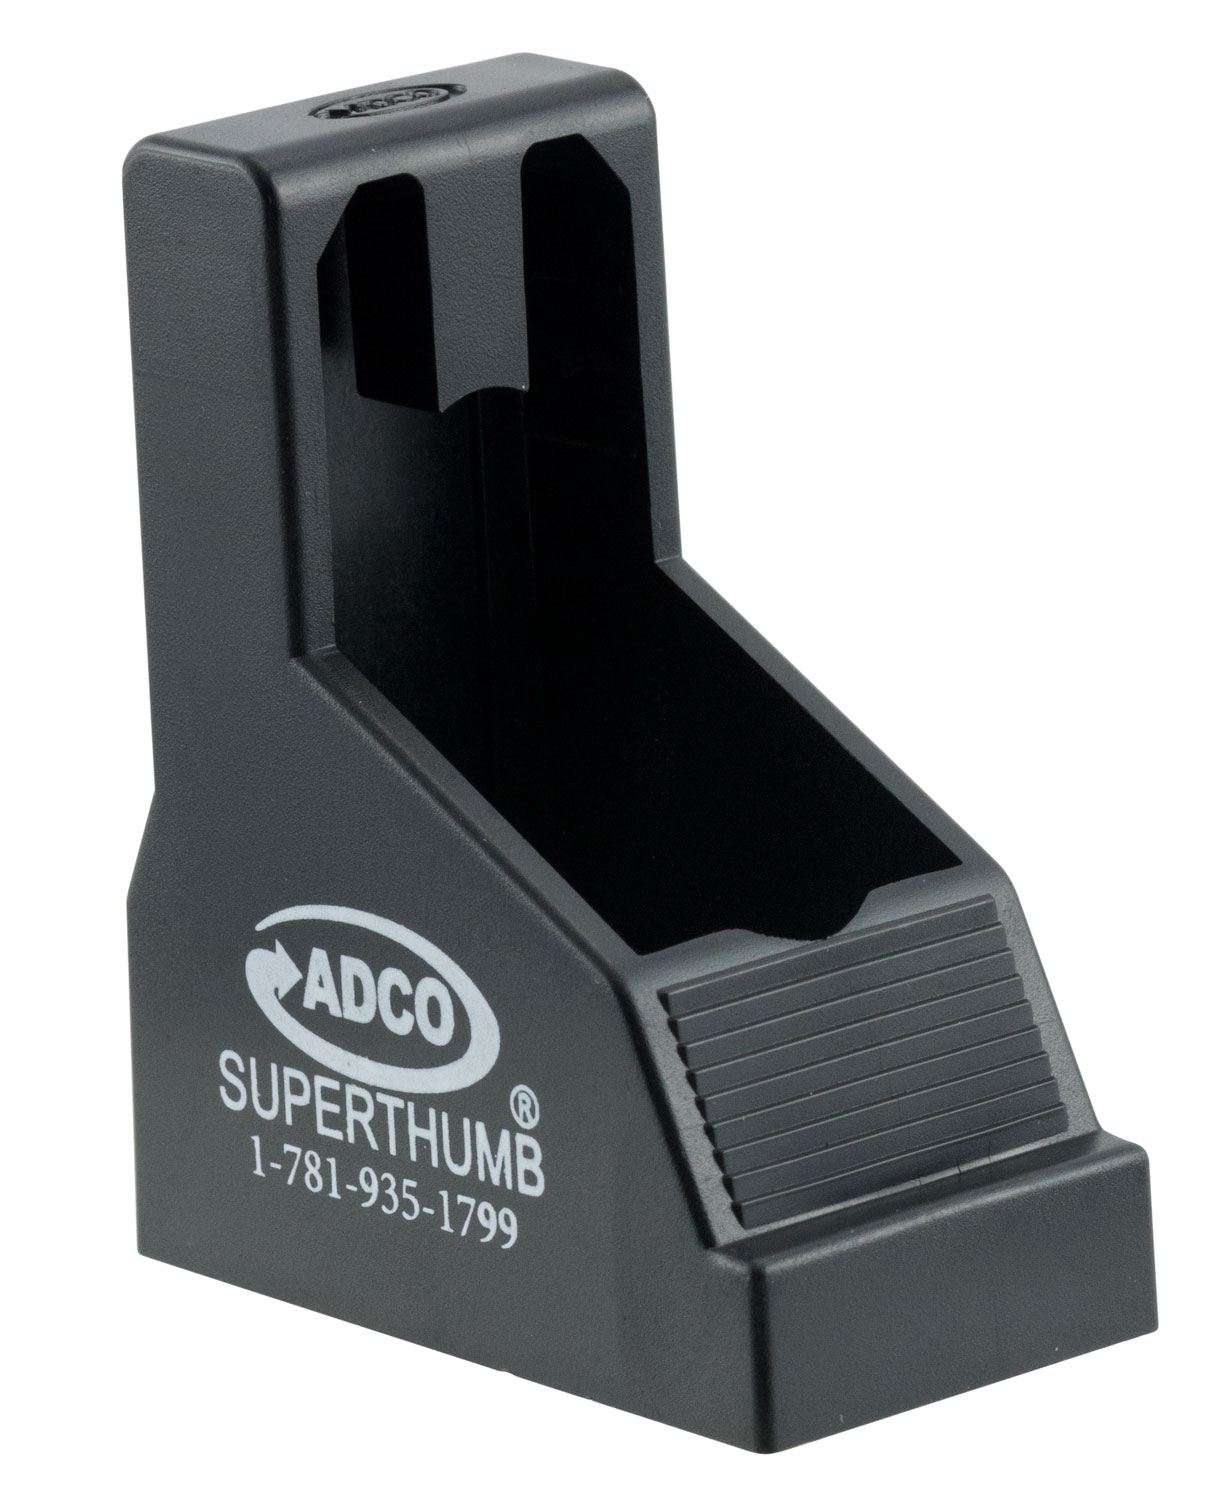 ADCO ST1 Super Thumb ST1 Mag Loader Double Stack Style, Black Polymer, For Use w/Multi-Caliber Pistols Including KelTec 9 & 40, Springfield XDS, XDM, XD40